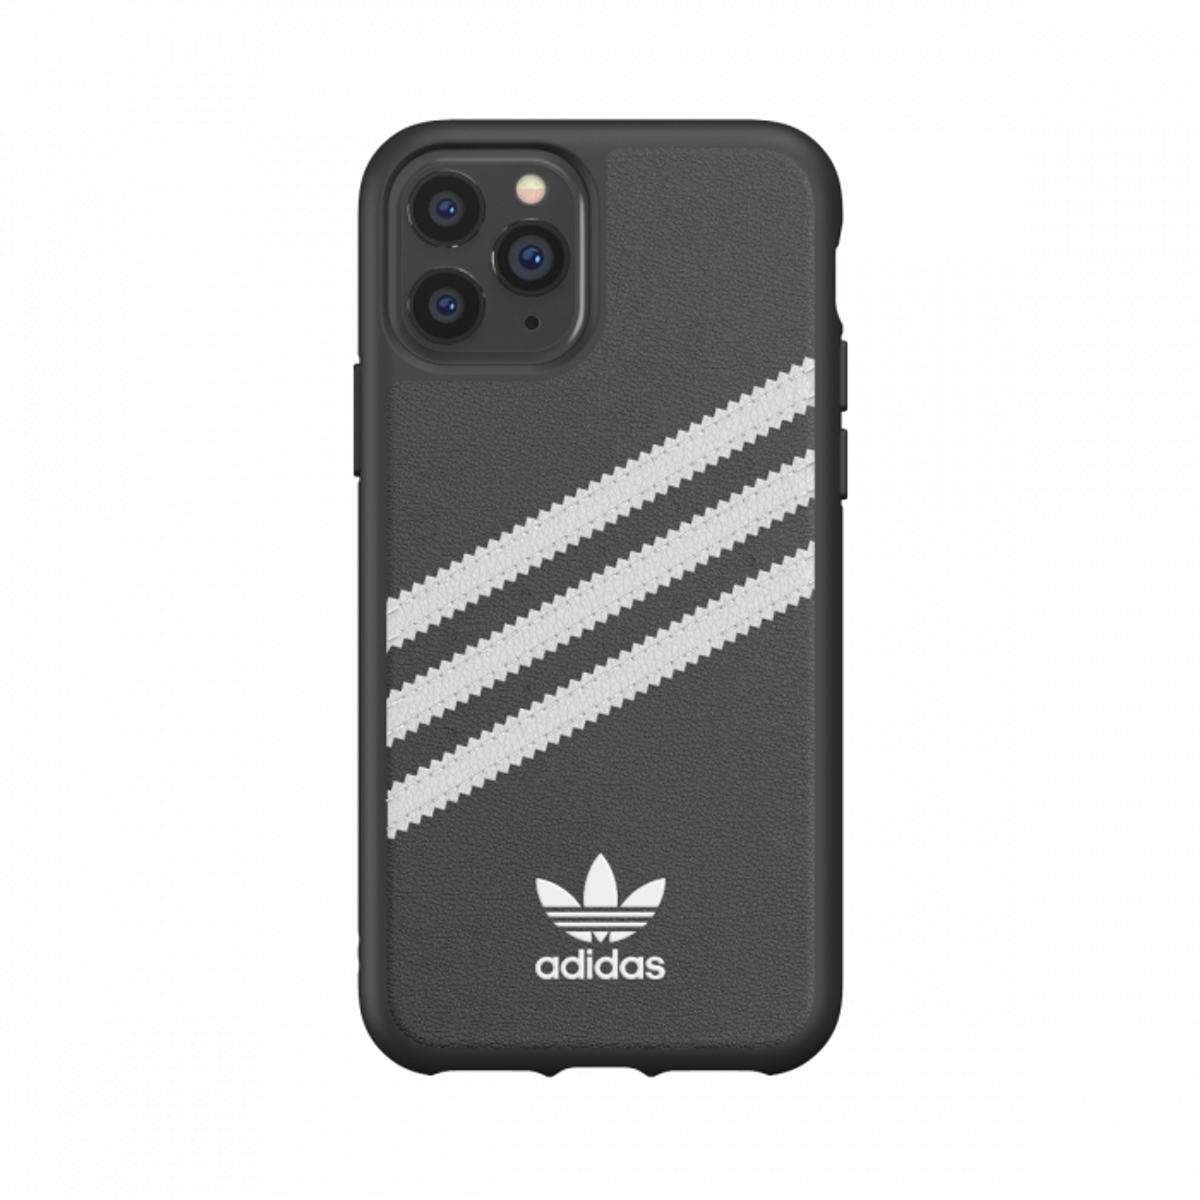 ADIDAS 36279 OR MOULDED CASE Apple, IP 11 11 Schwarz/Weiß BL/WH, Pro, iPhone Bookcover, PRO